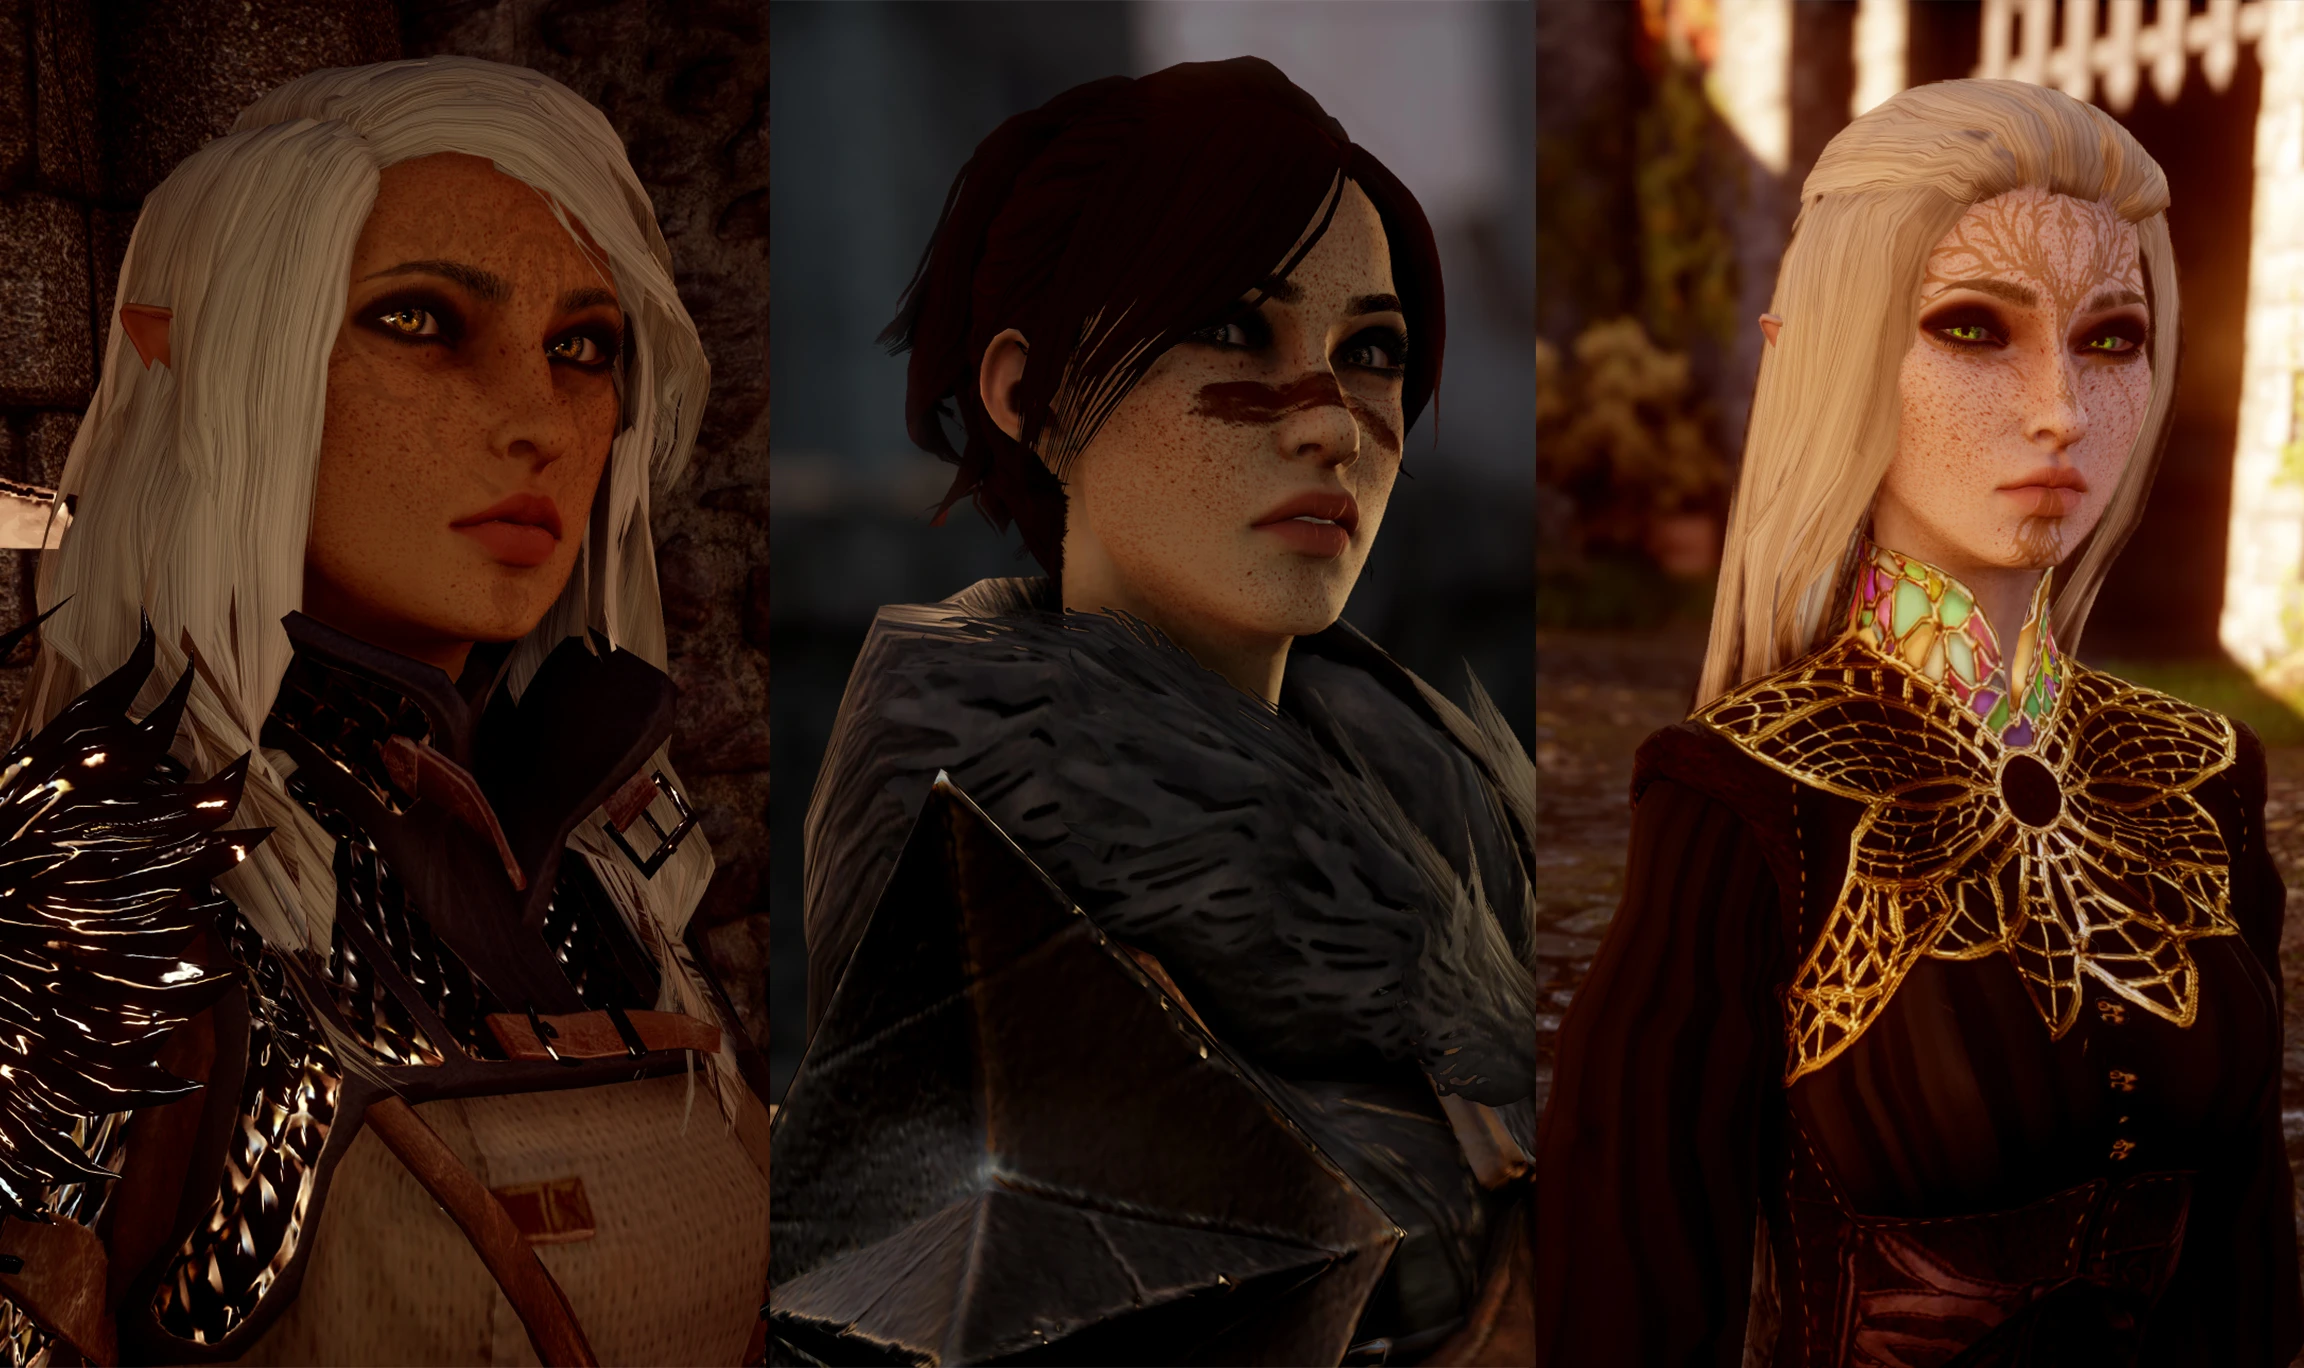 dragon age inquisition character creator